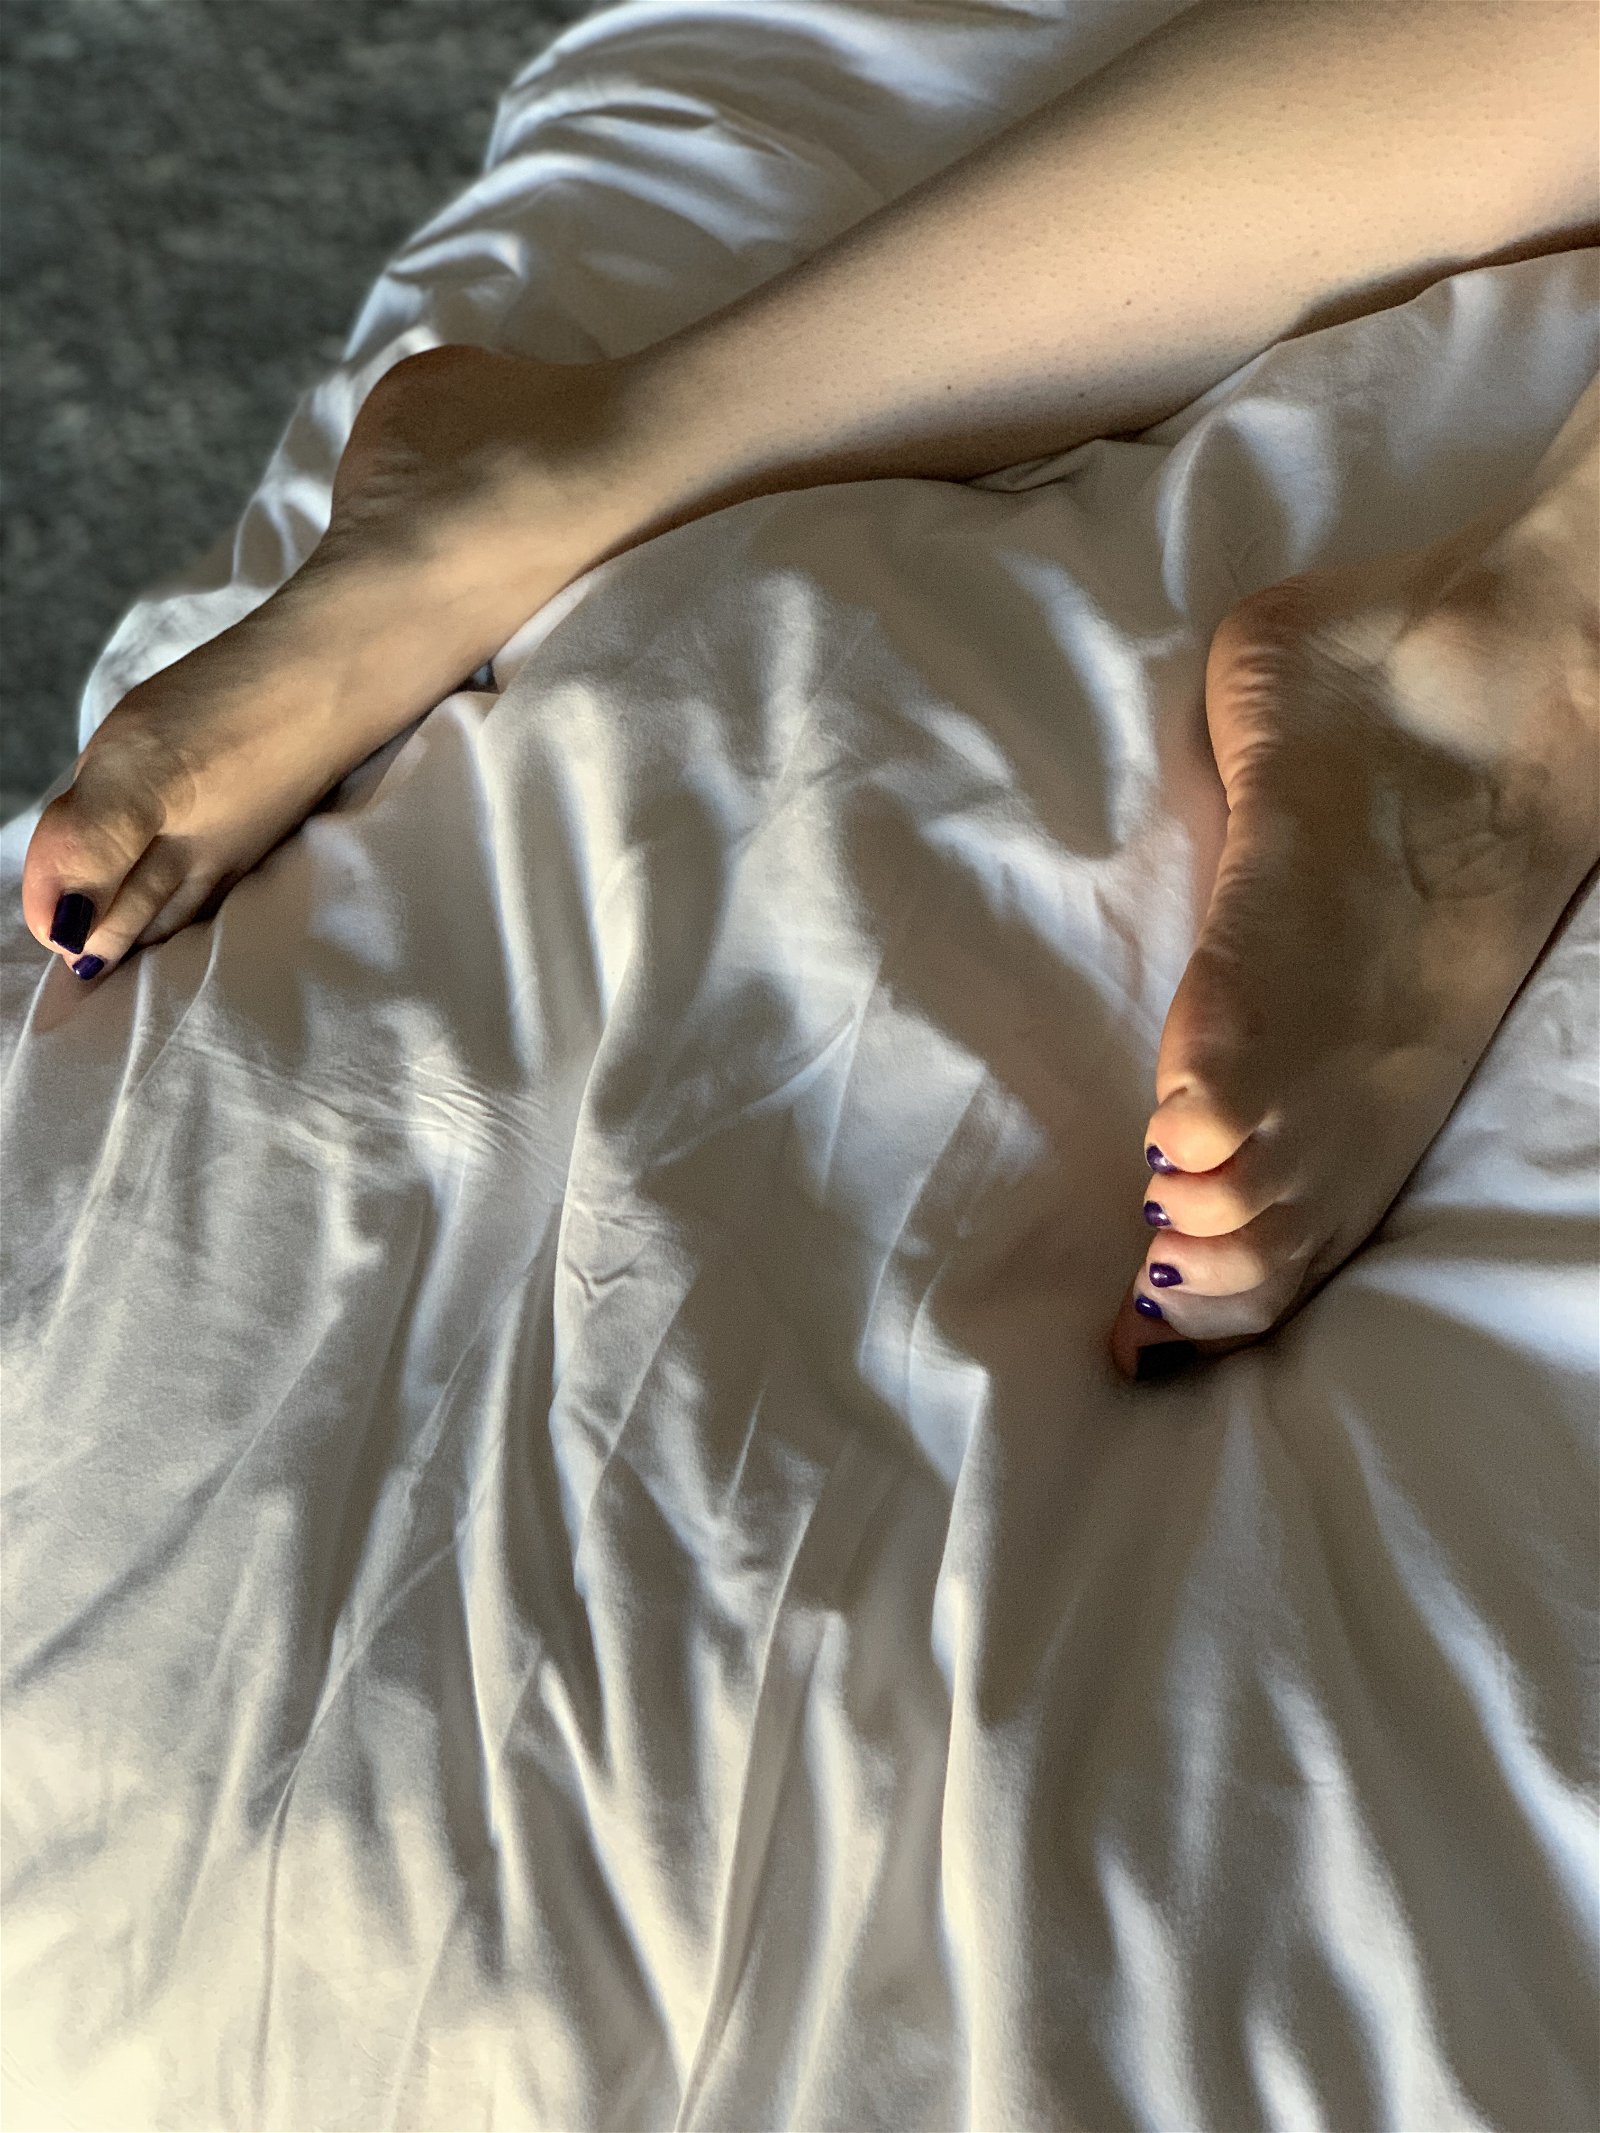 Photo by jeffbo57 with the username @jeffbo57,  December 11, 2019 at 4:17 PM. The post is about the topic High Heel love and the text says 'barefoot'